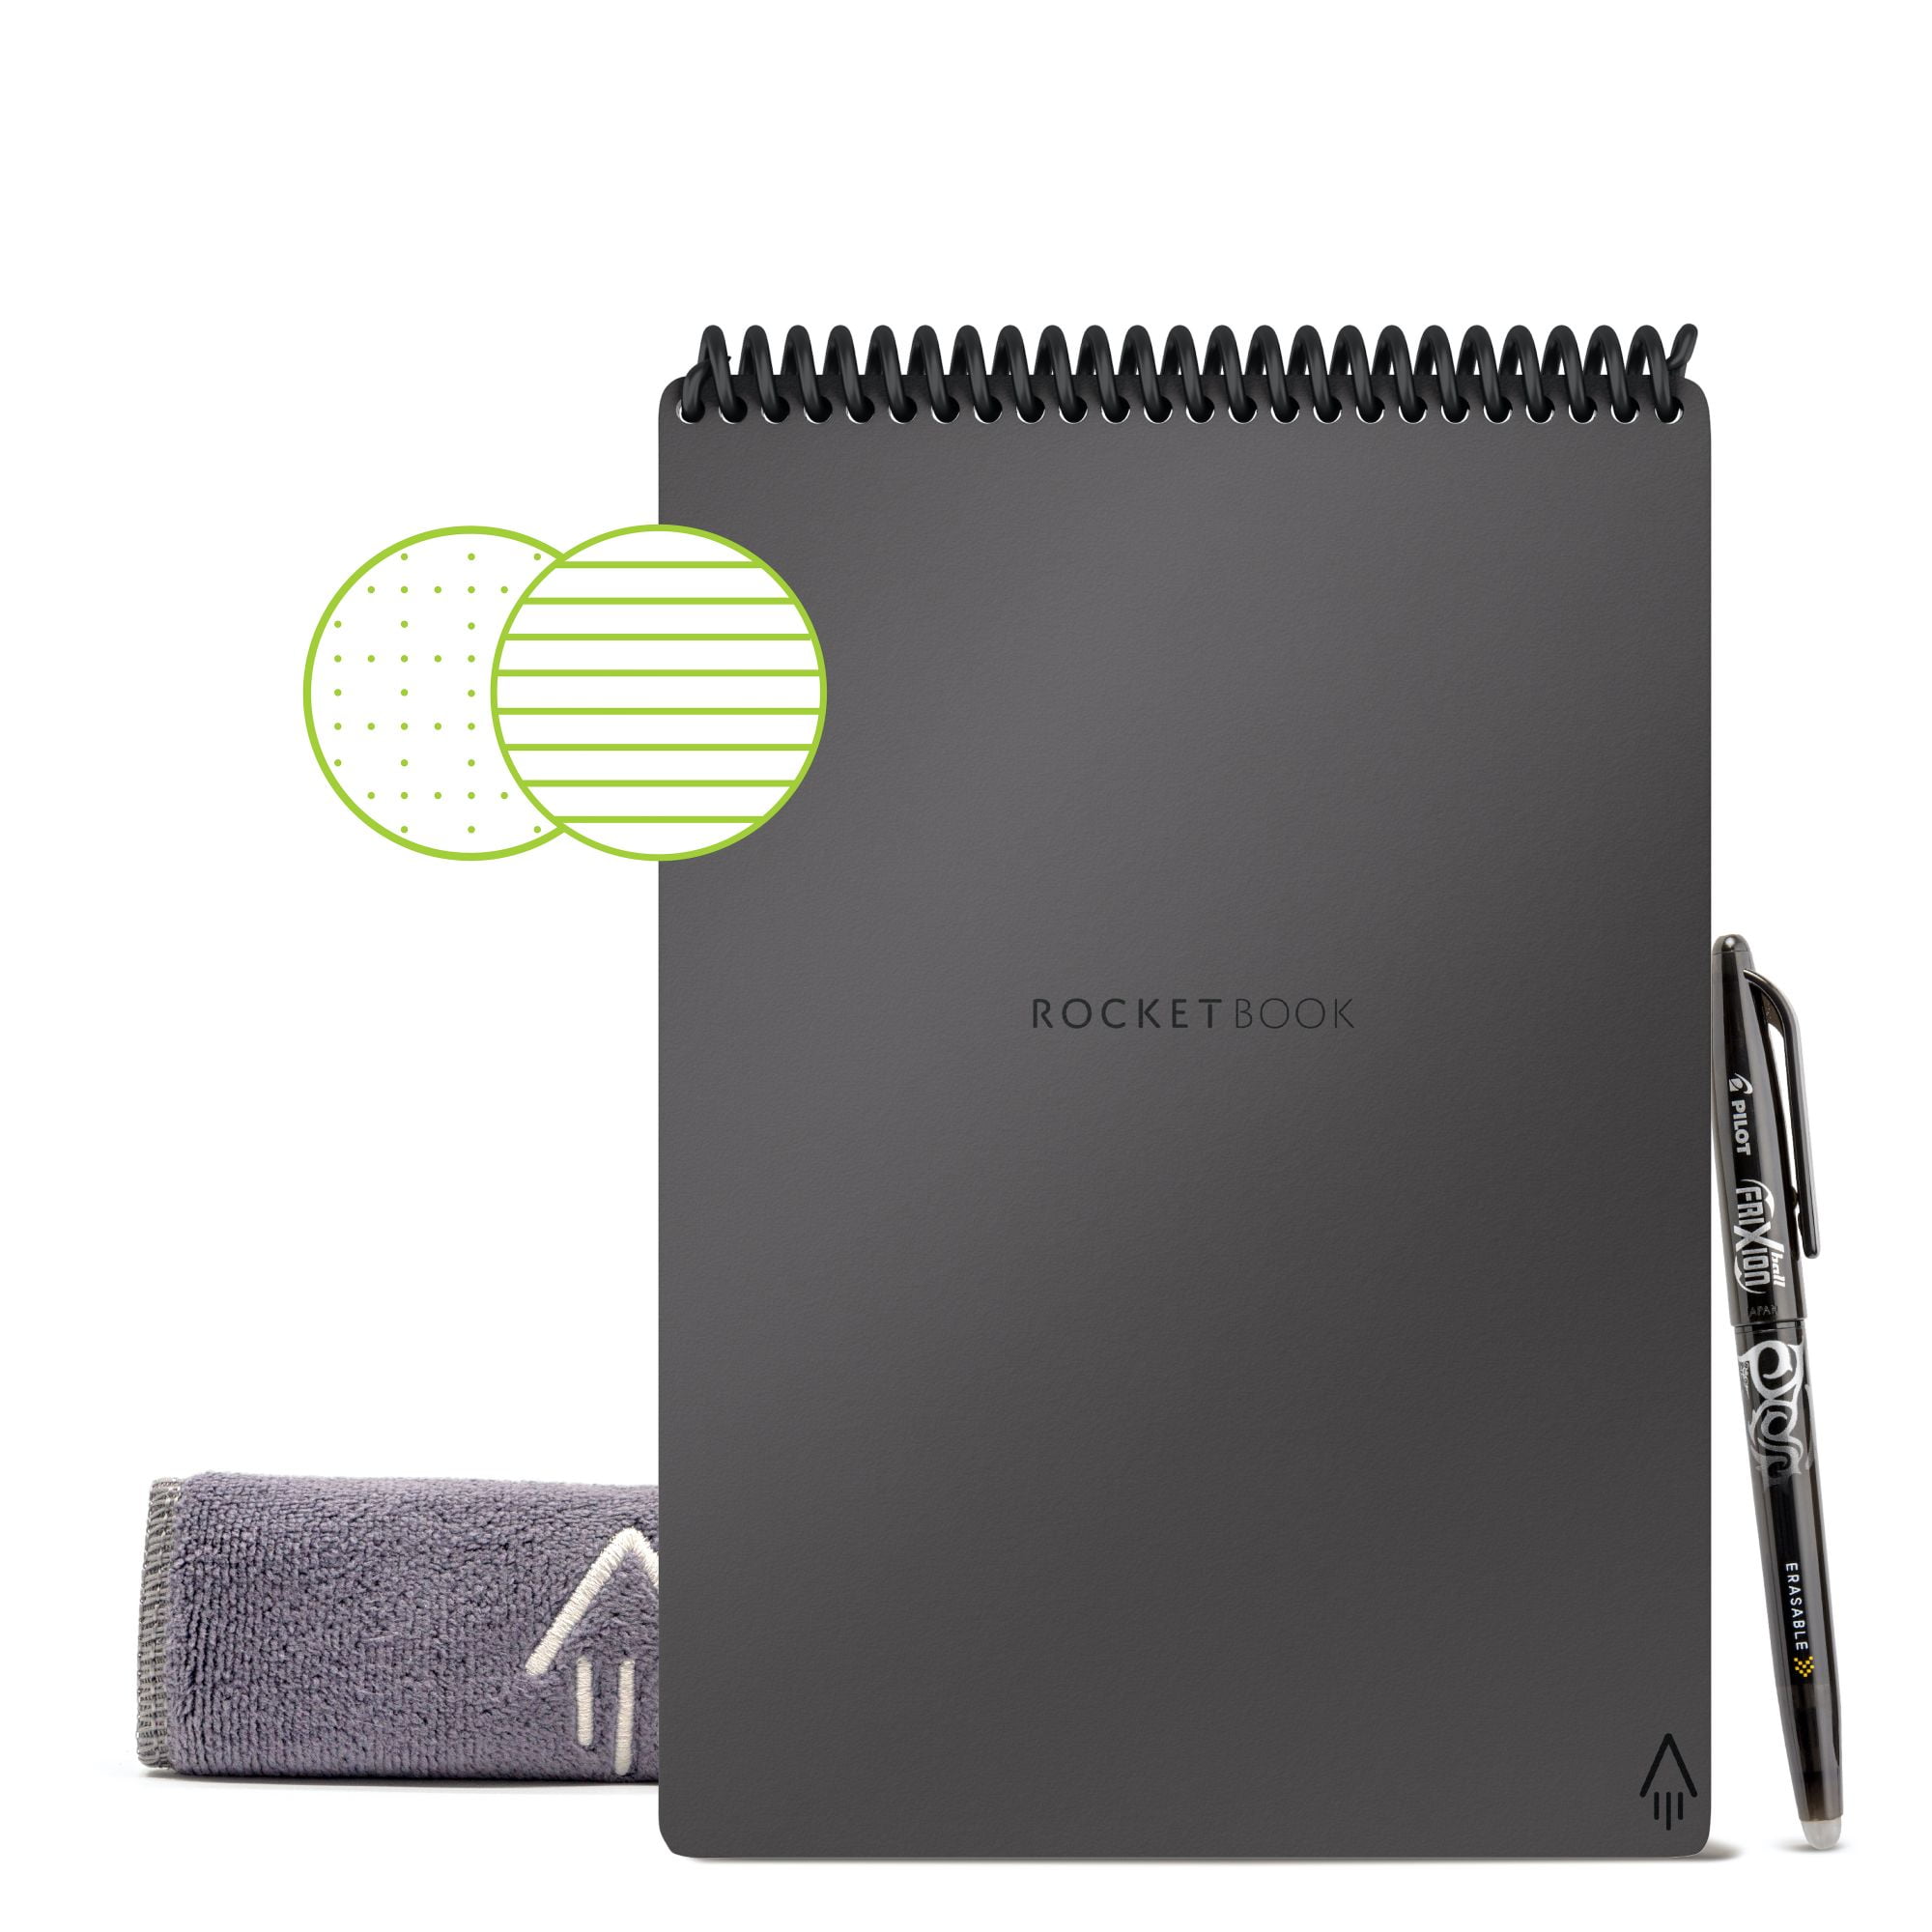 Dotted Grid Eco-Friendly Notebook with 1 Pilot Frixion Pen & 1 Microfiber Cloth Included 6 x 8 Rocketbook Smart Reusable Notebook Deep Space Gray Cover Executive Size 